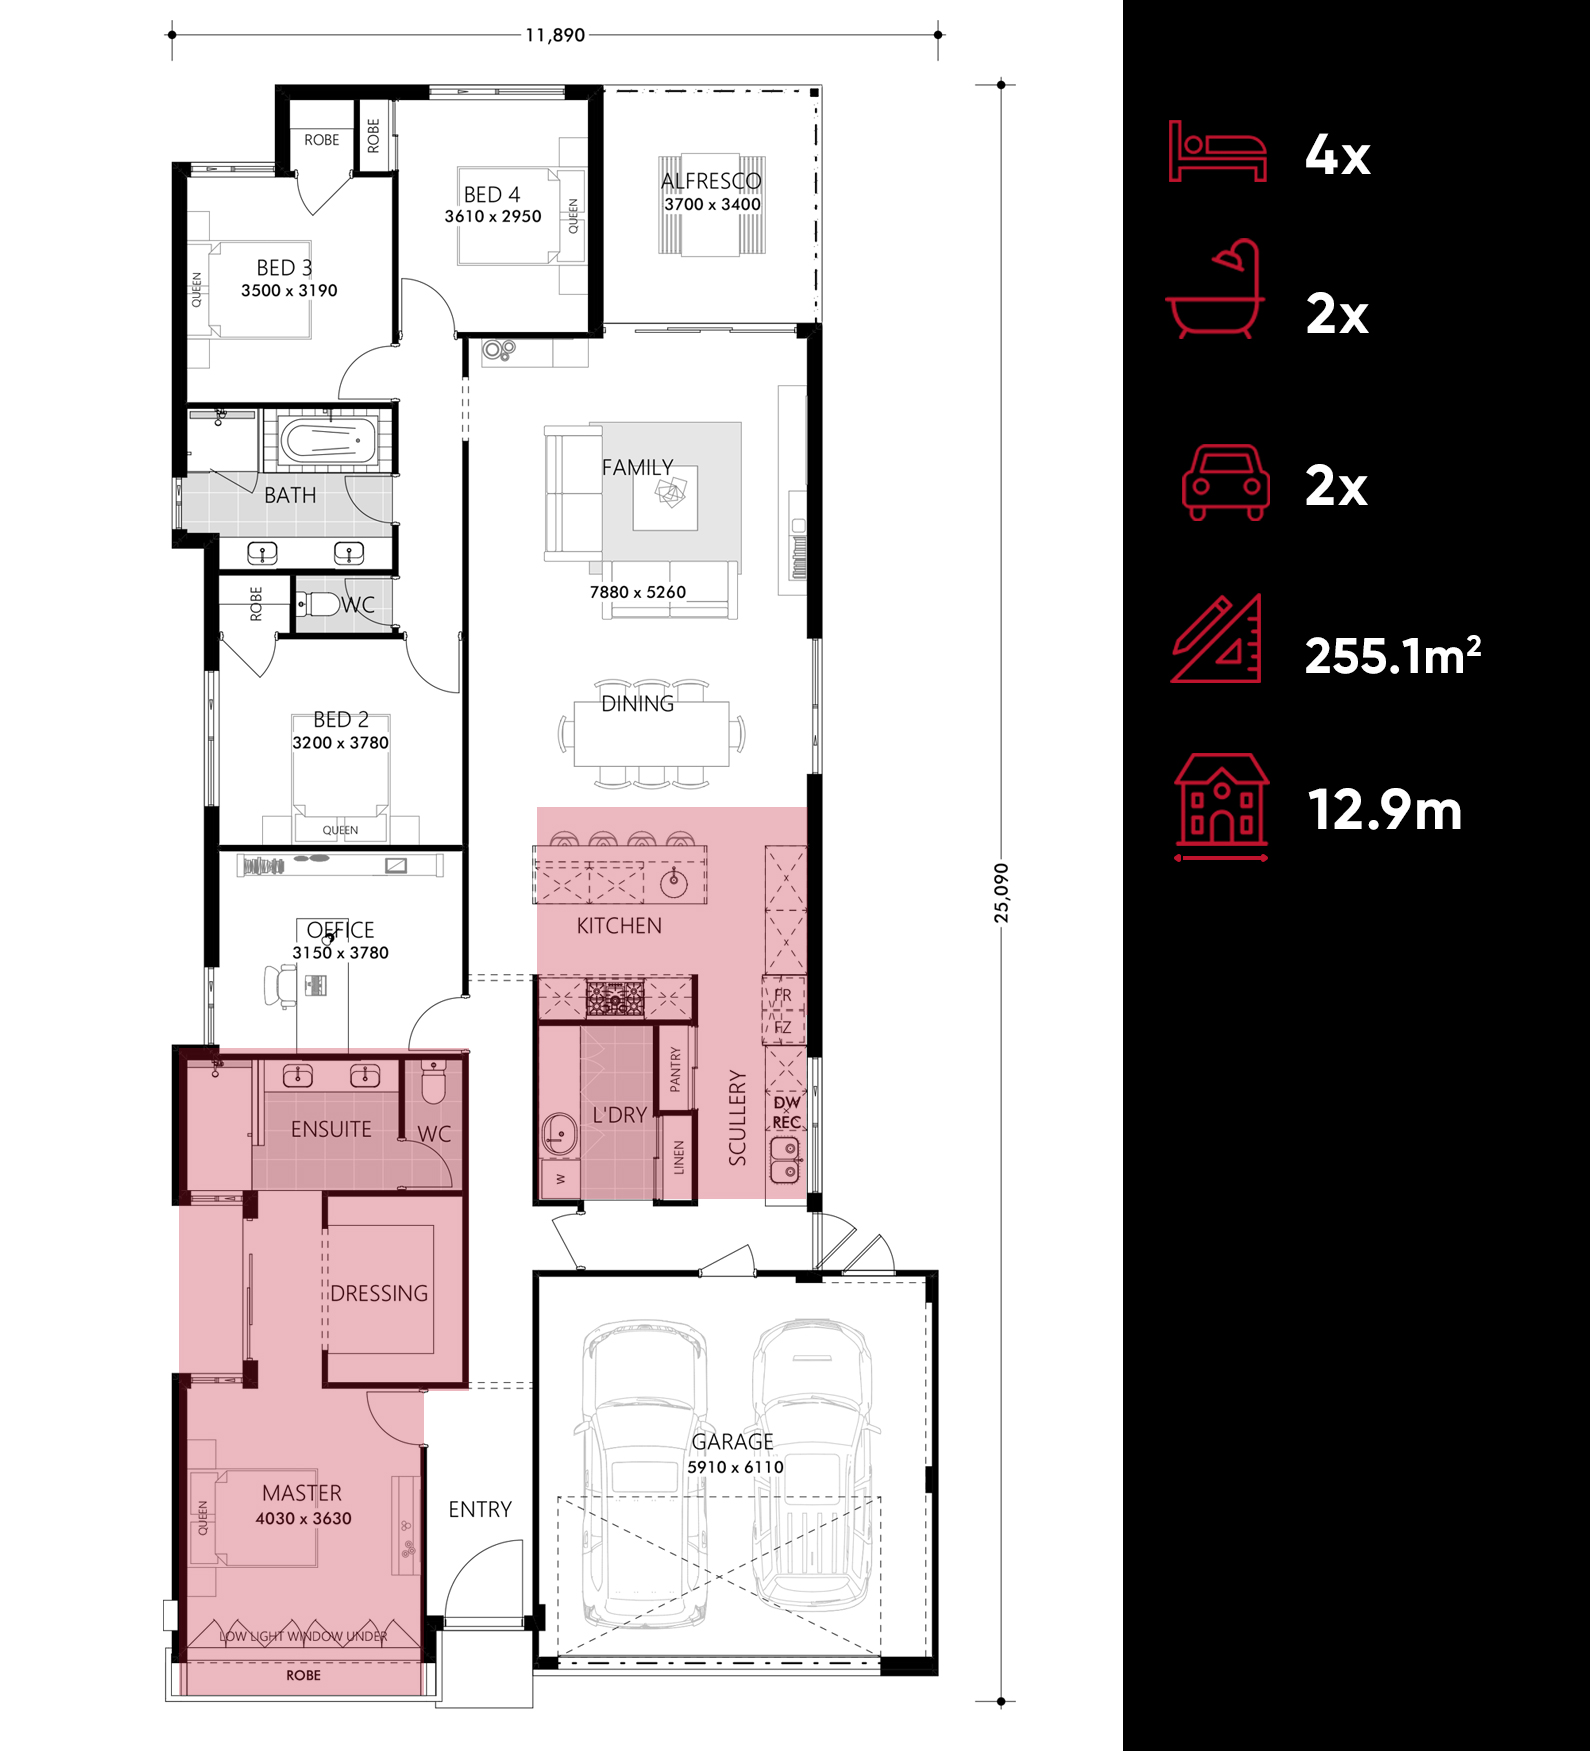 Punk-and-the-Plums-1.0 floorplan